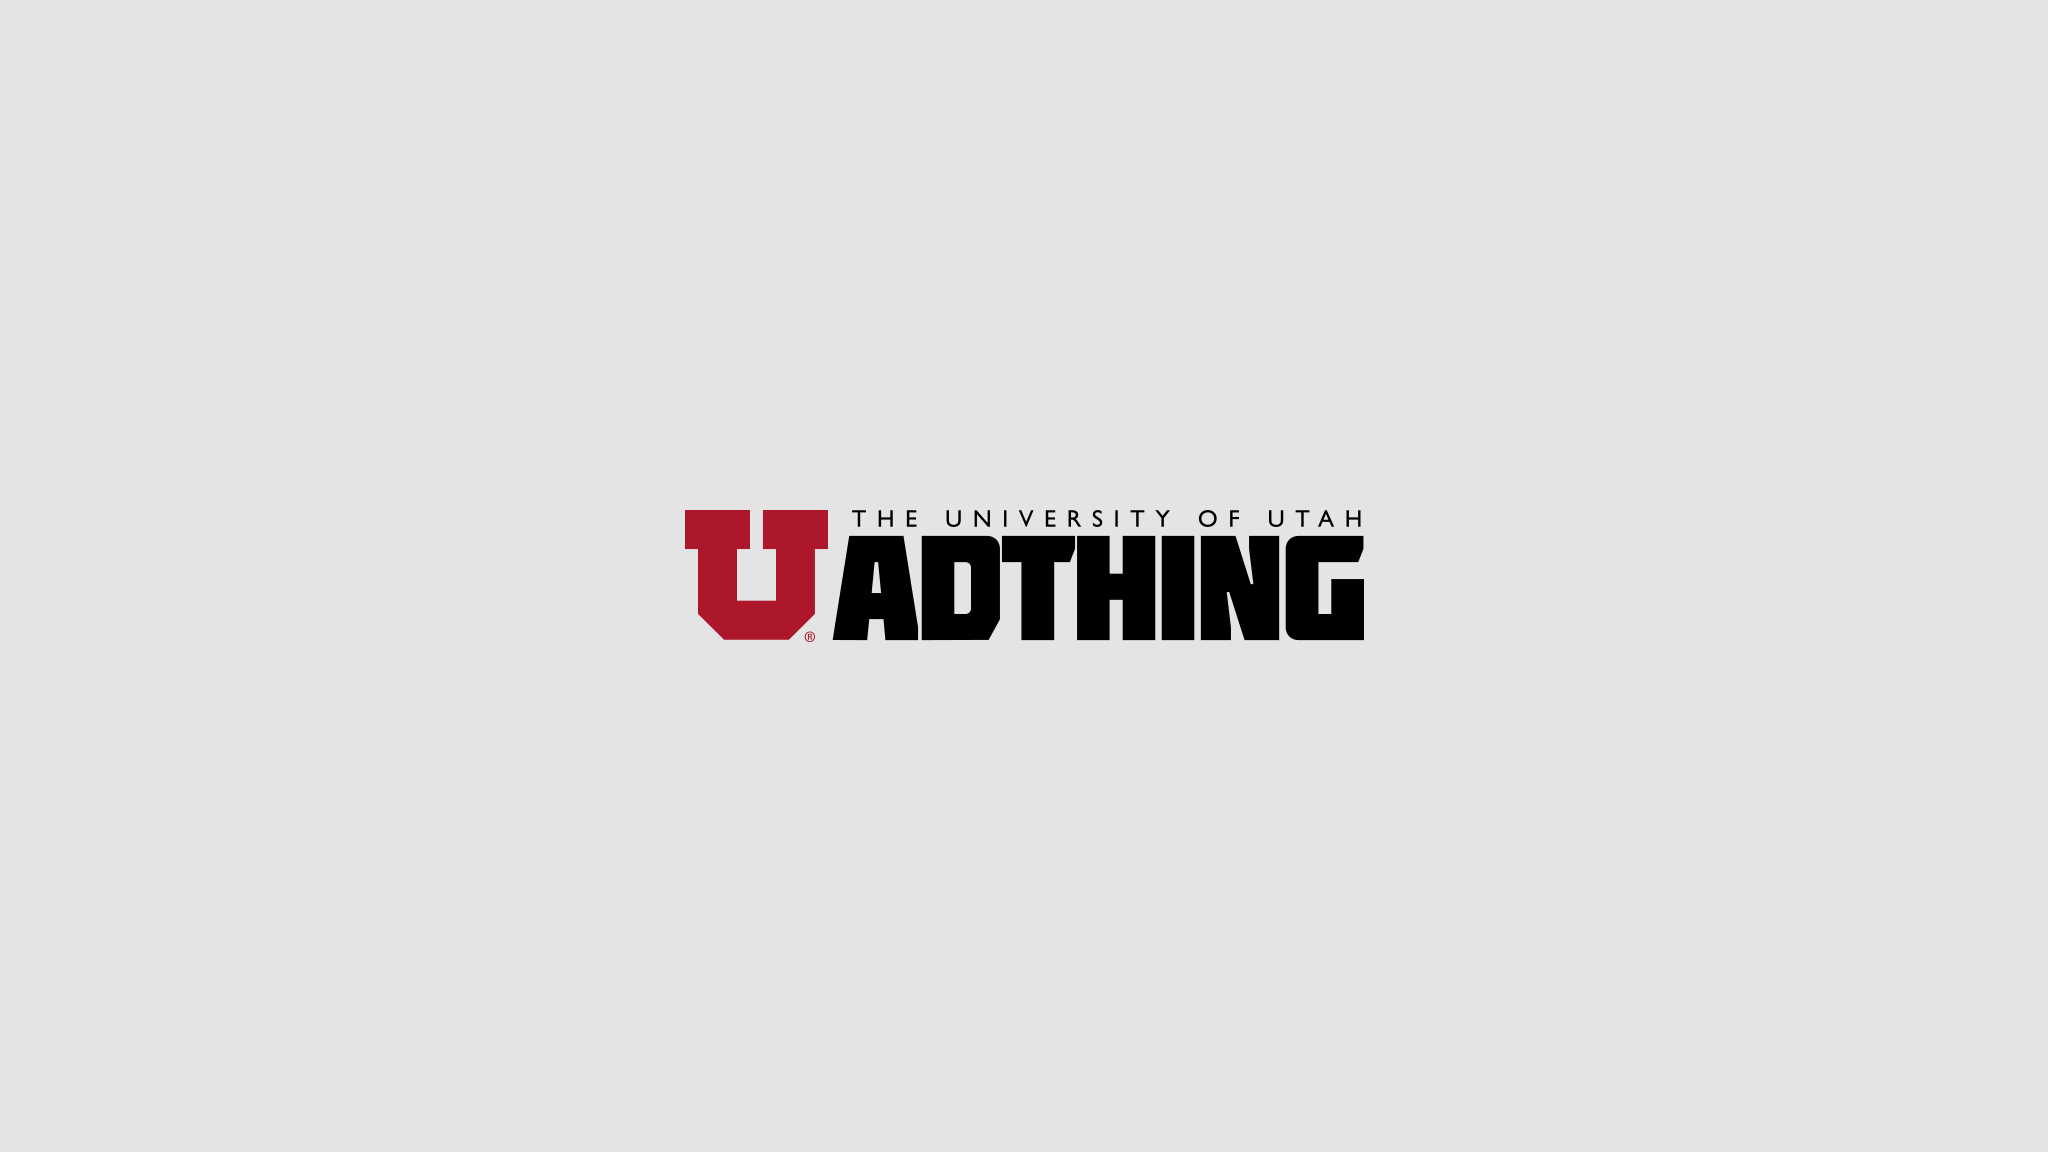 Learn about AdThing Utah